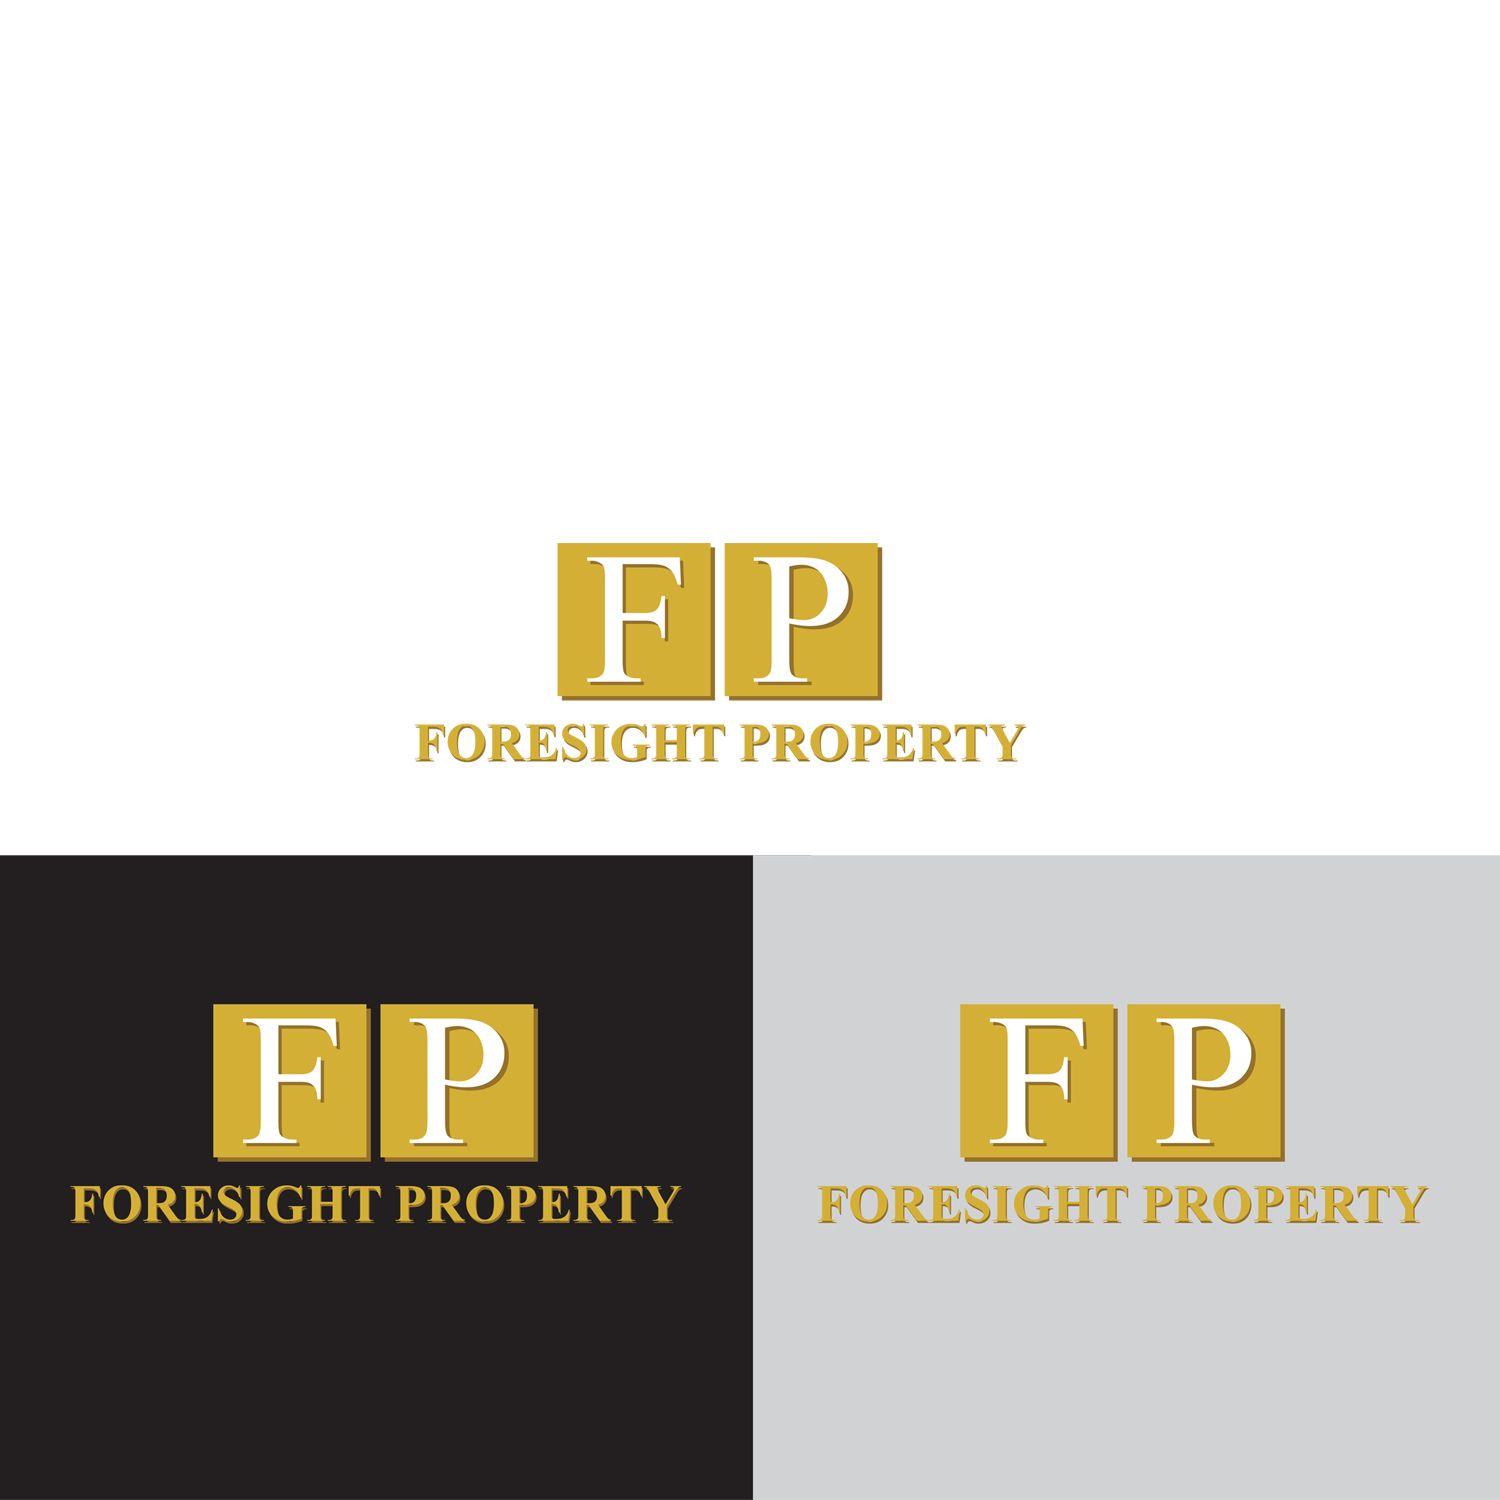 Foresight Logo - Professional, Serious Logo Design for Foresight Property by ...